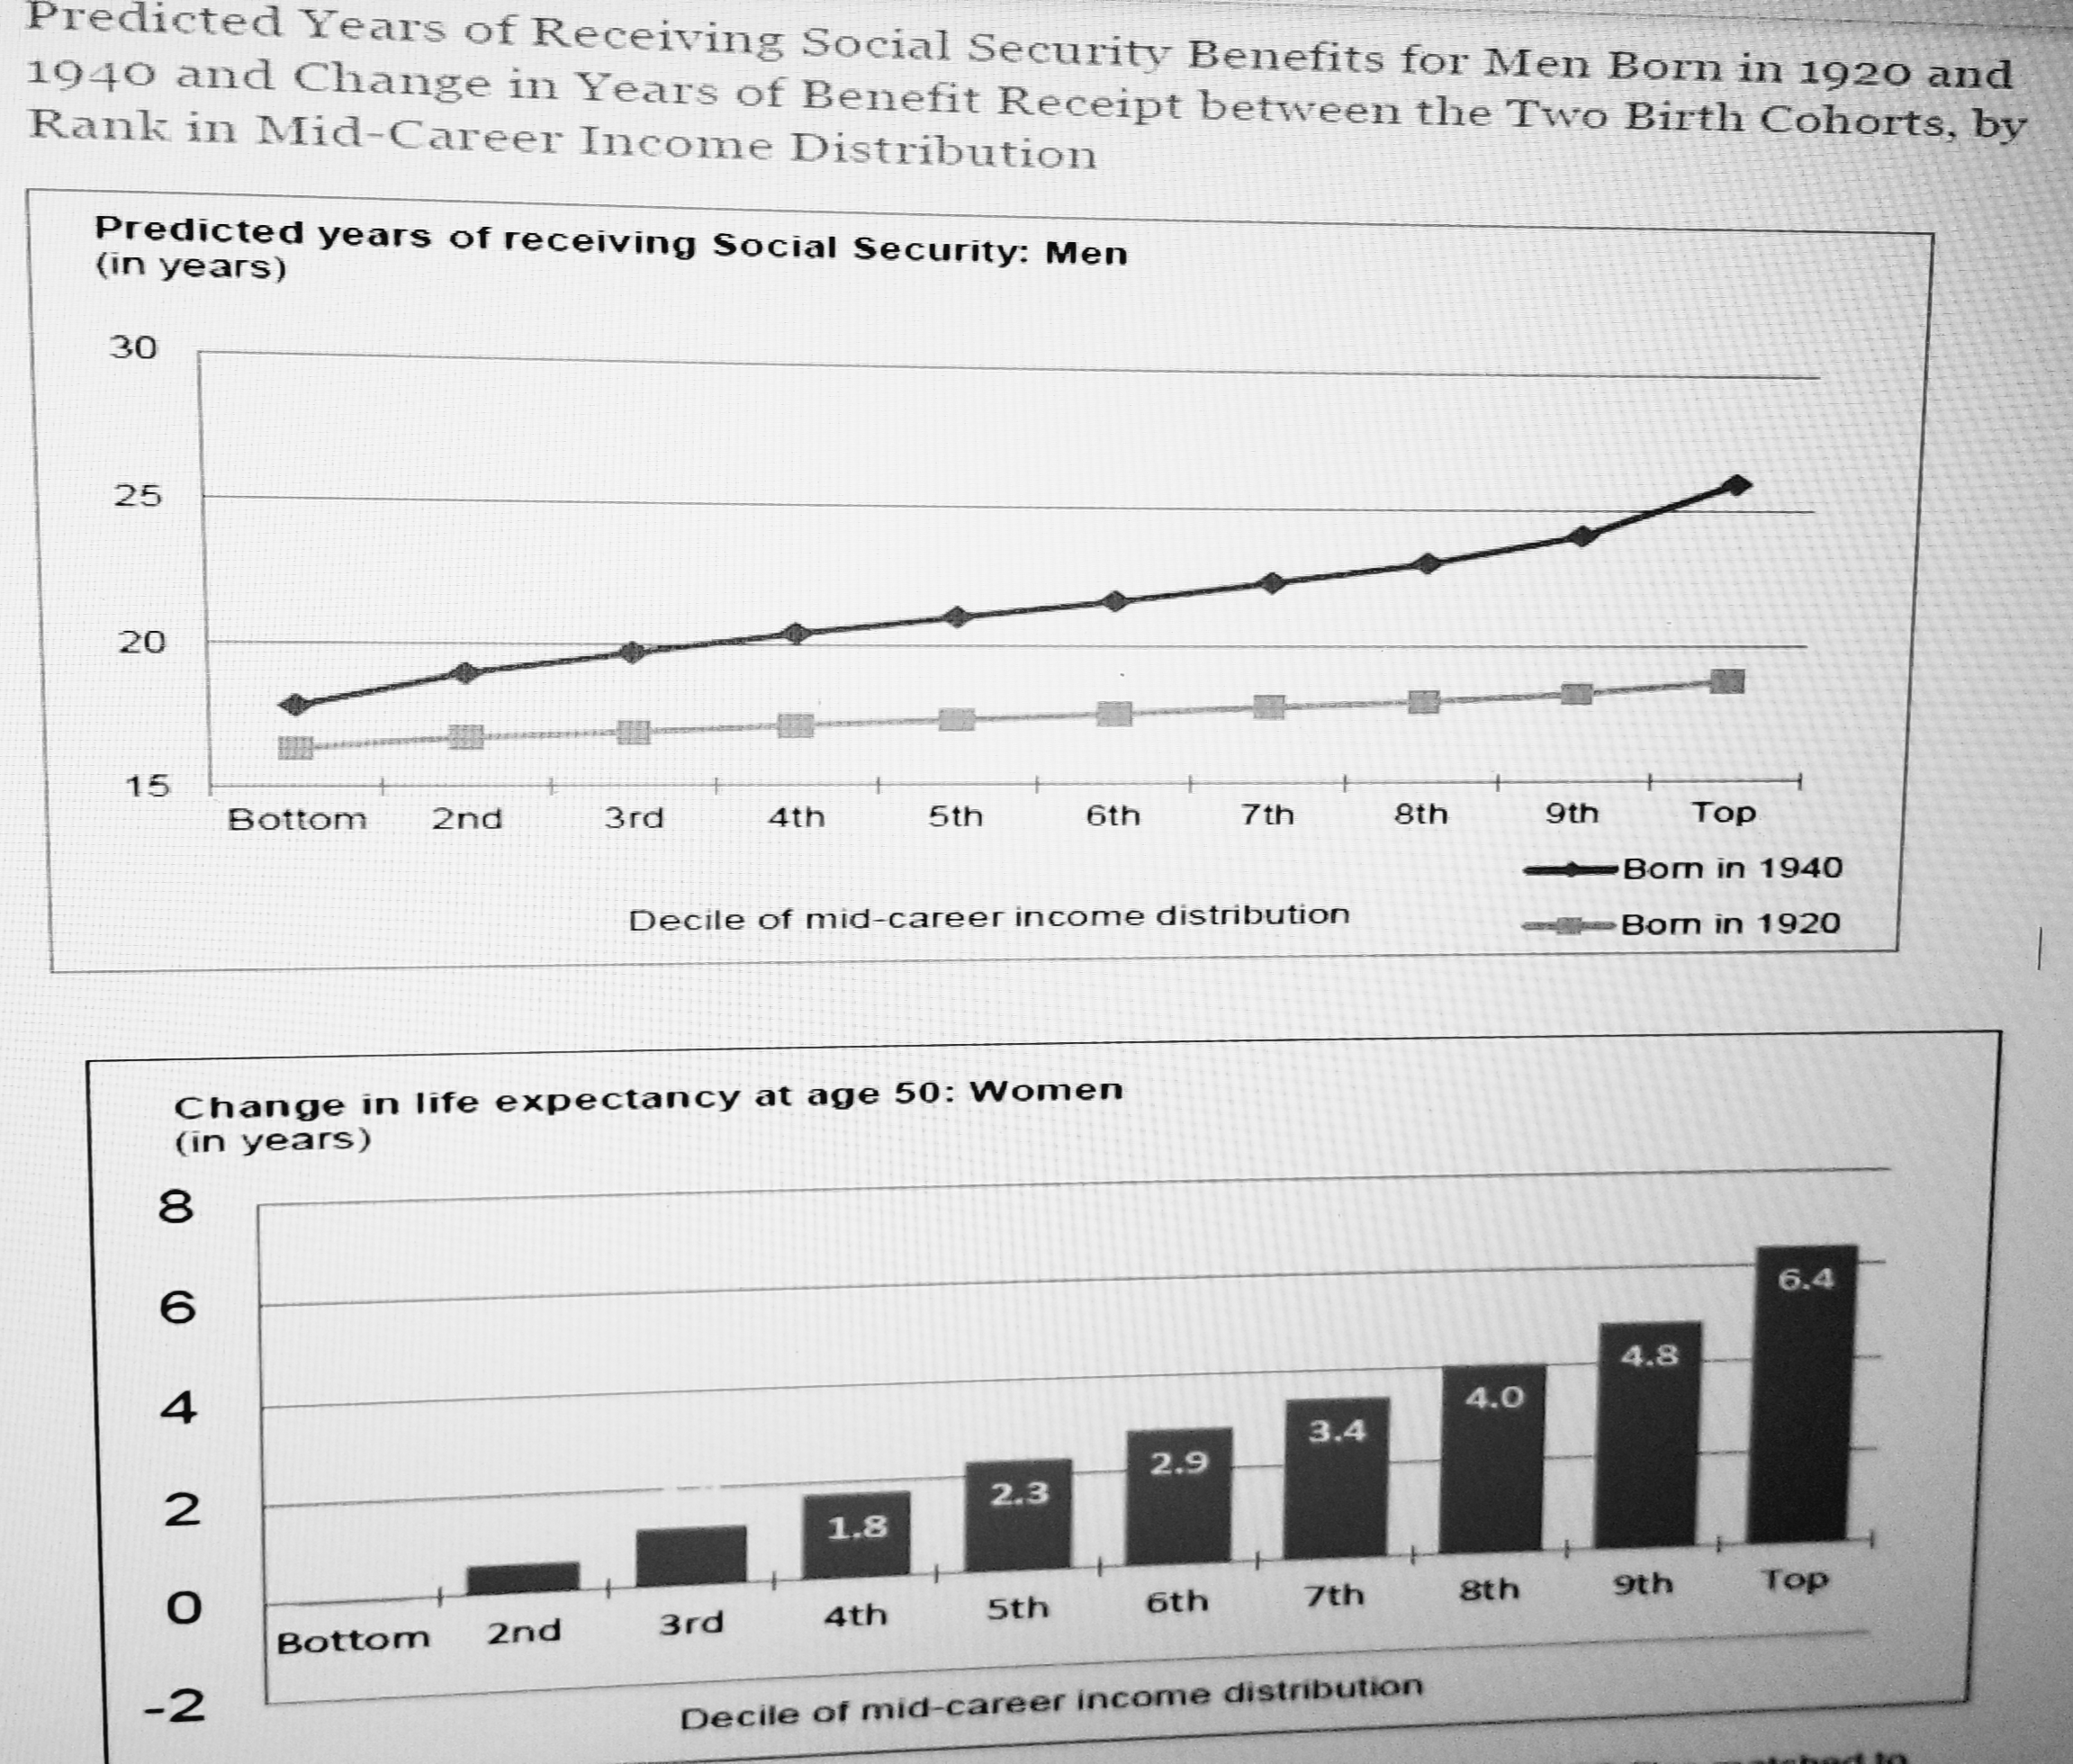 Predicted
Years
of
Receiving
Social Secuity Benefits for Men Born in 1920 and
1940 and Change in Years of Benefit Receipt between the Two Birth Cohorts, by
Rank in Mid-Career Income Distribution
Predicted years of receiving Social Security: Men
(in years)
30
25
20
15
8th
Top
Bom in 1940
Born in 1920
Bottom 2nd
3rd
4th
5th
6th
7th
9th
Decile of mid-career income distribution
Change in life expectancy at age 50: Women
(in years)
8
6
4
2
6.4
4.8
4.0
3.4
2.9
2.3
1.8
7th
8th
9th Top
Sth
6th
3rd
4th
Bottom 2nd
-2
Decile of mid-career income distribution
